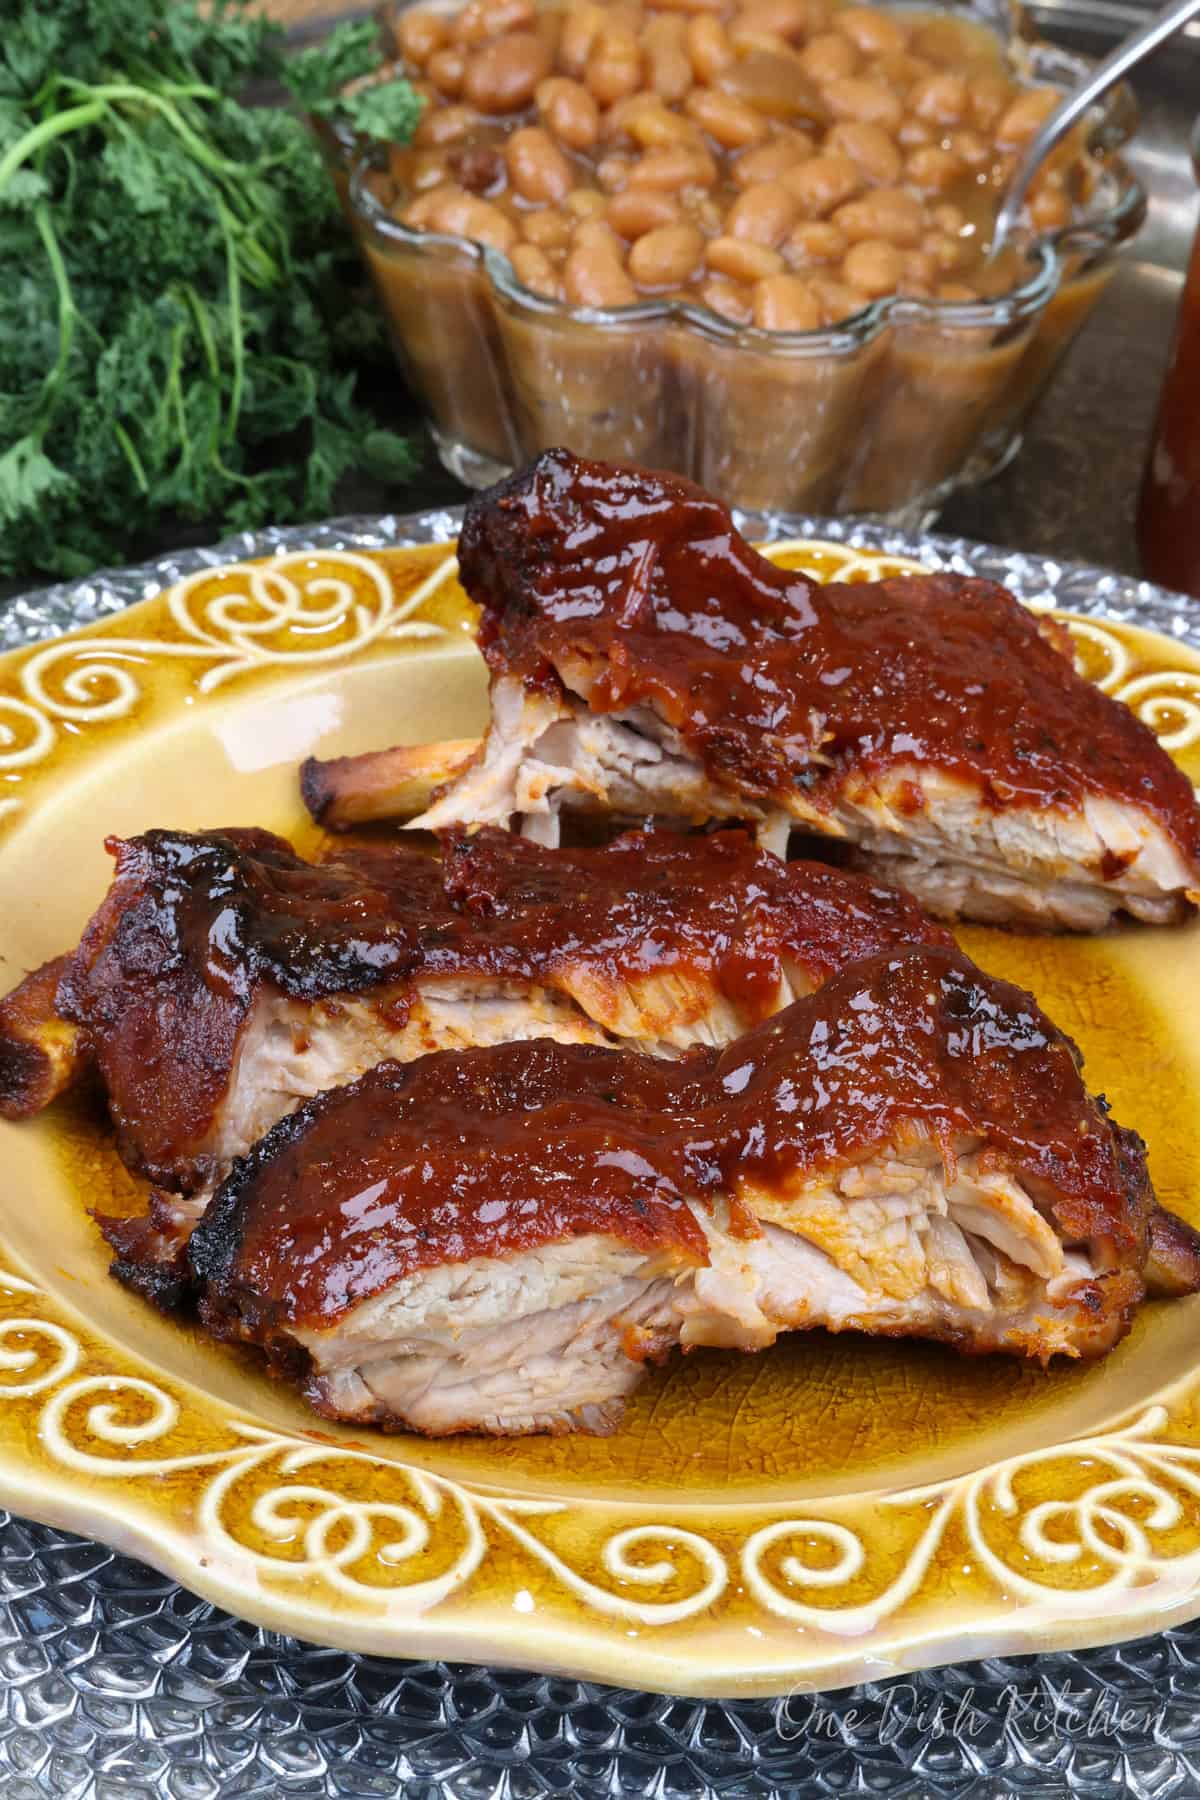 three baby back ribs with BBQ sauce on a gold plate next to a bowl of baked beans.